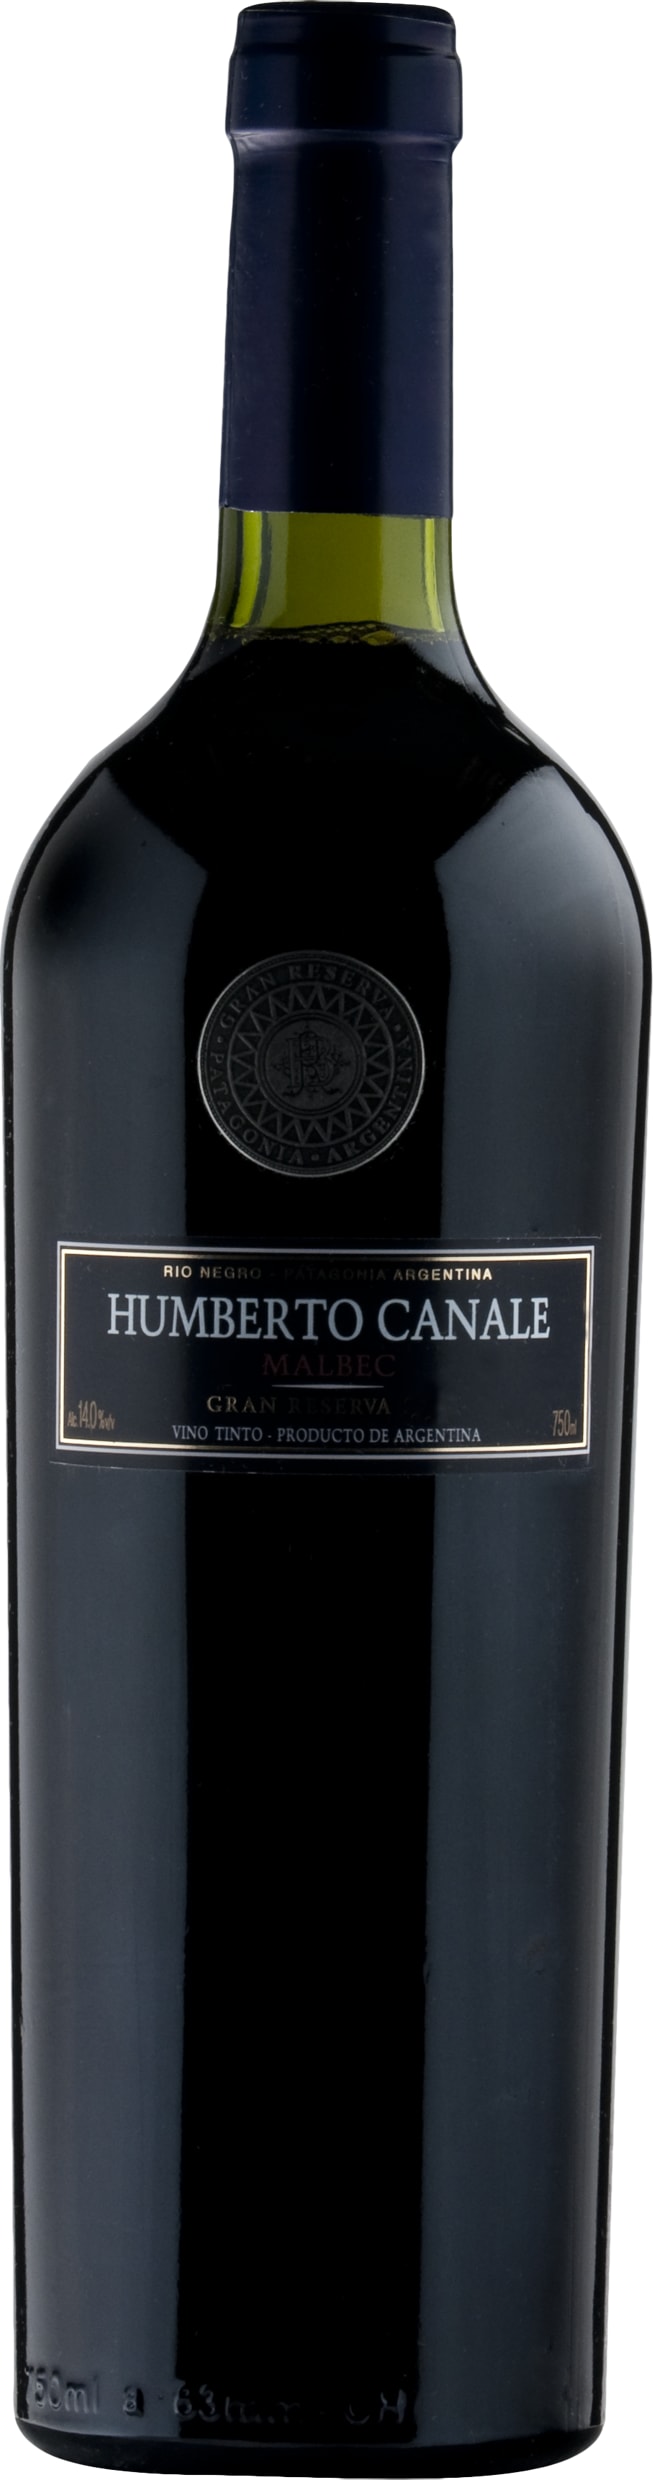 Humberto Canale Seleccion de Familia Malbec 2021 75cl - Buy Humberto Canale Wines from GREAT WINES DIRECT wine shop